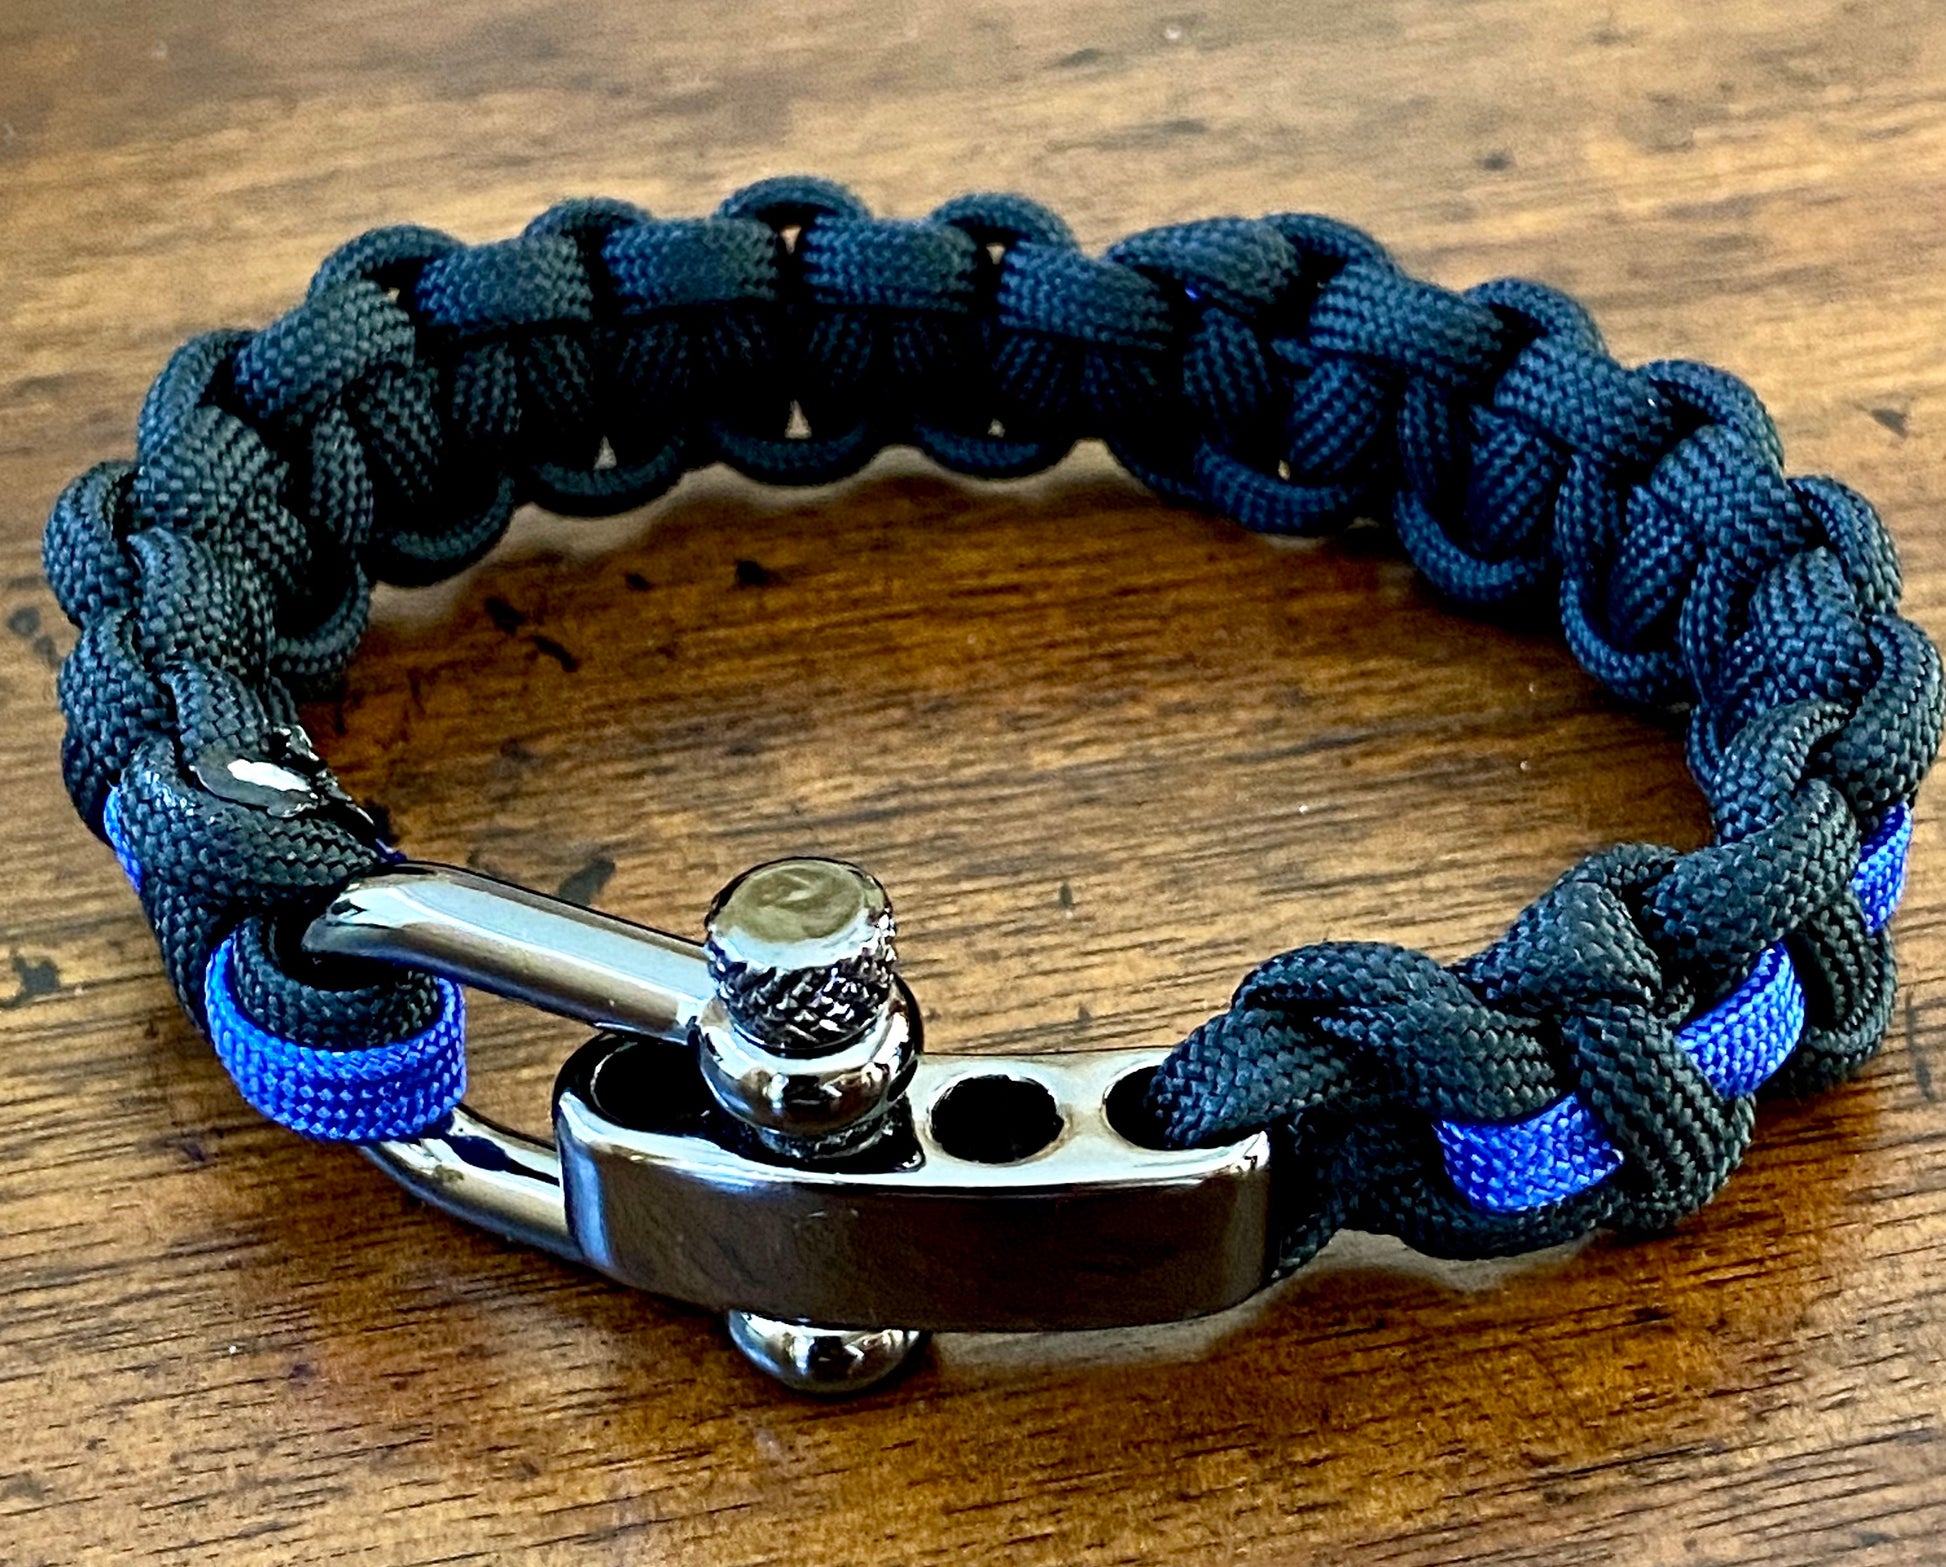 Black Paracord Rescue Paracord Survival Bracelet With 550 Rope And Tight  Braided Buckle For Tent Escape From Yiwujiahuajewelry, $0.72 | DHgate.Com